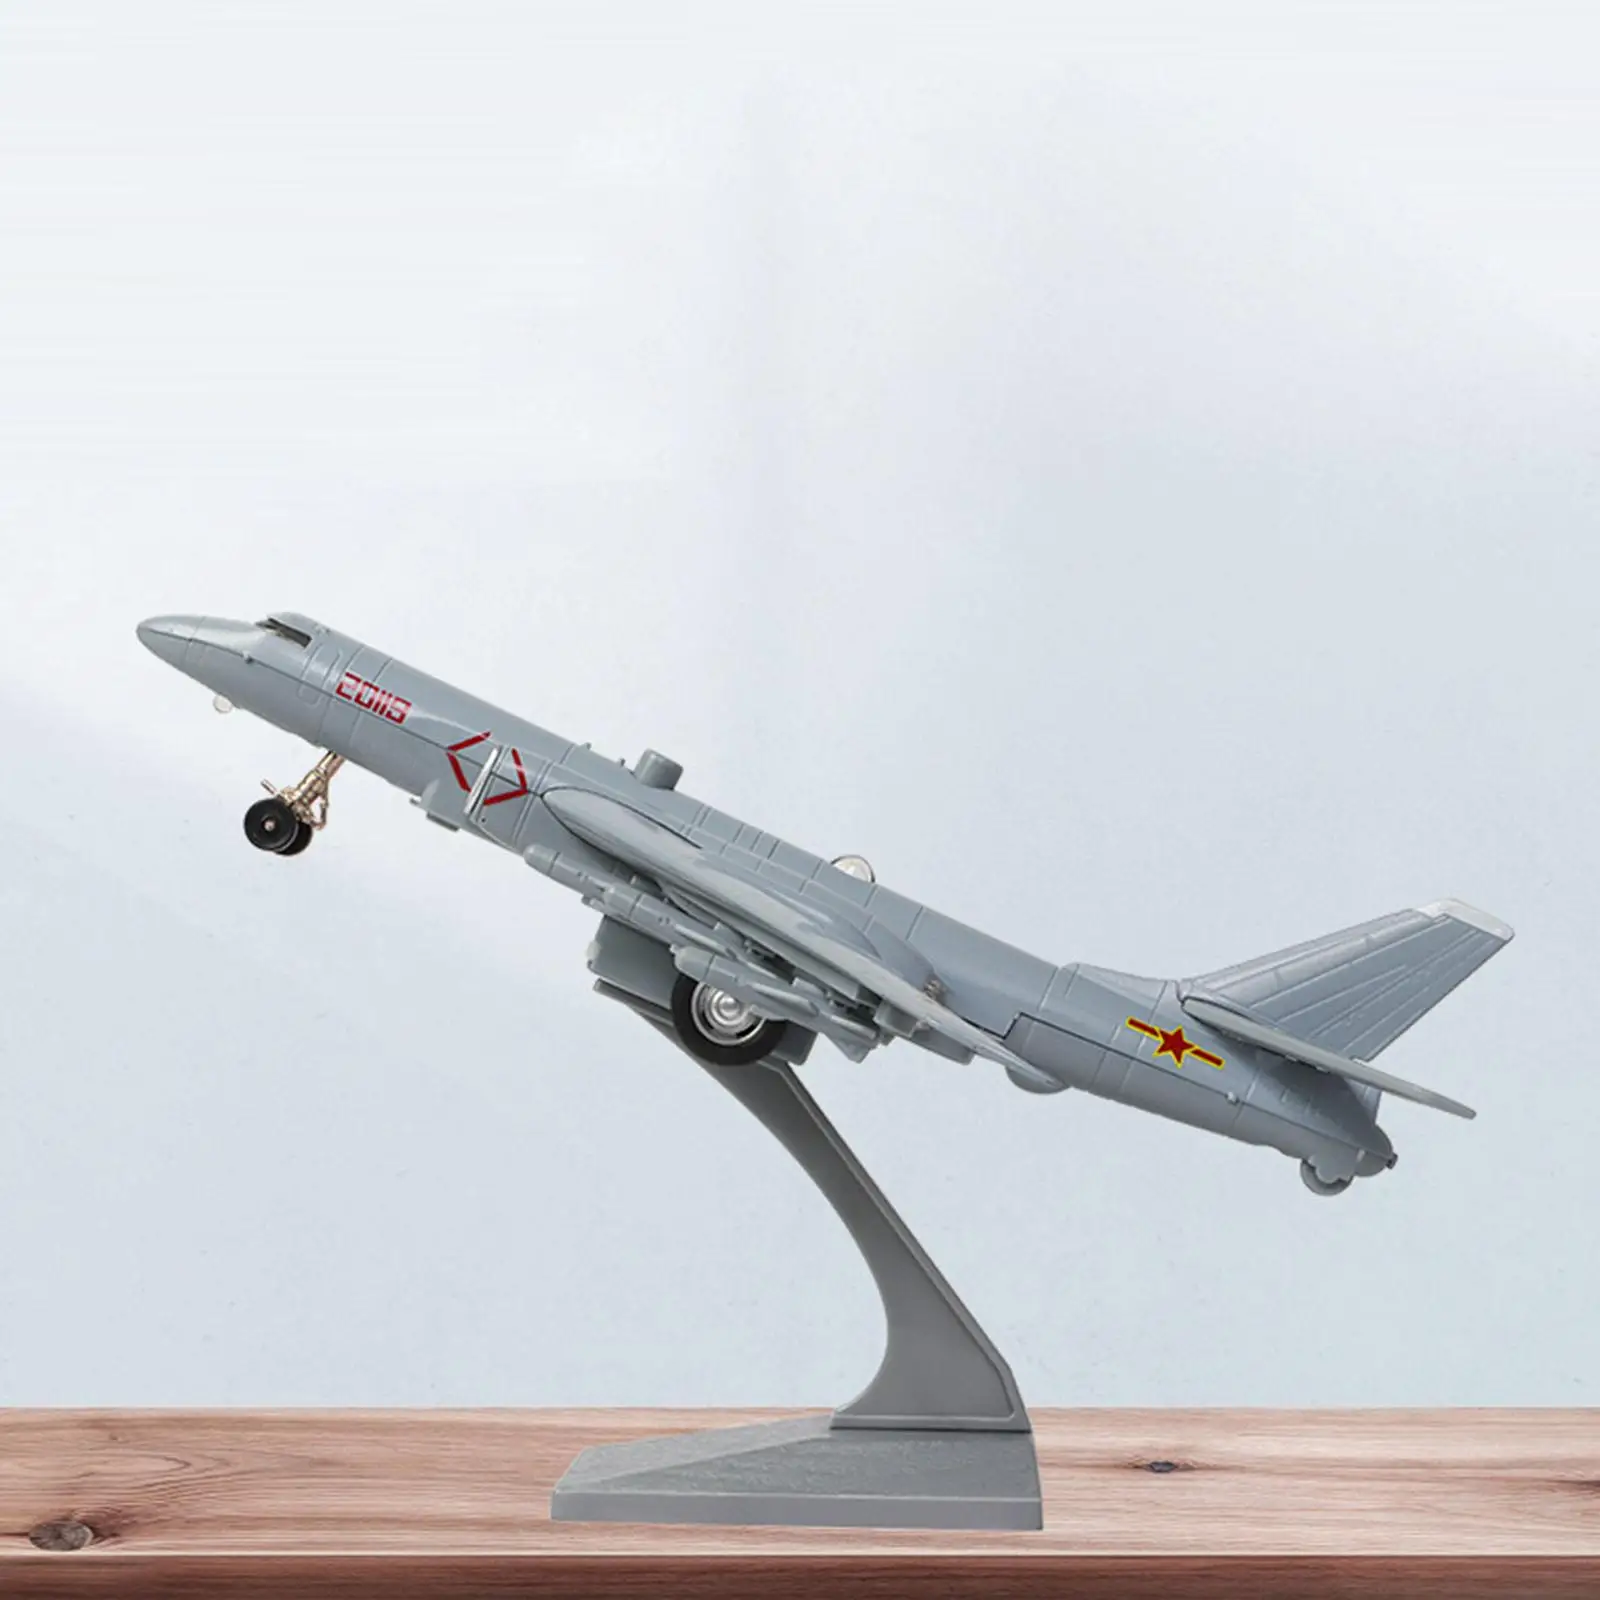 

1:144 Strike Fighter Plane Aircraft Display Model Diecast Metal with Stand Toy for Kids Gift Collection Commemorate Home Decor